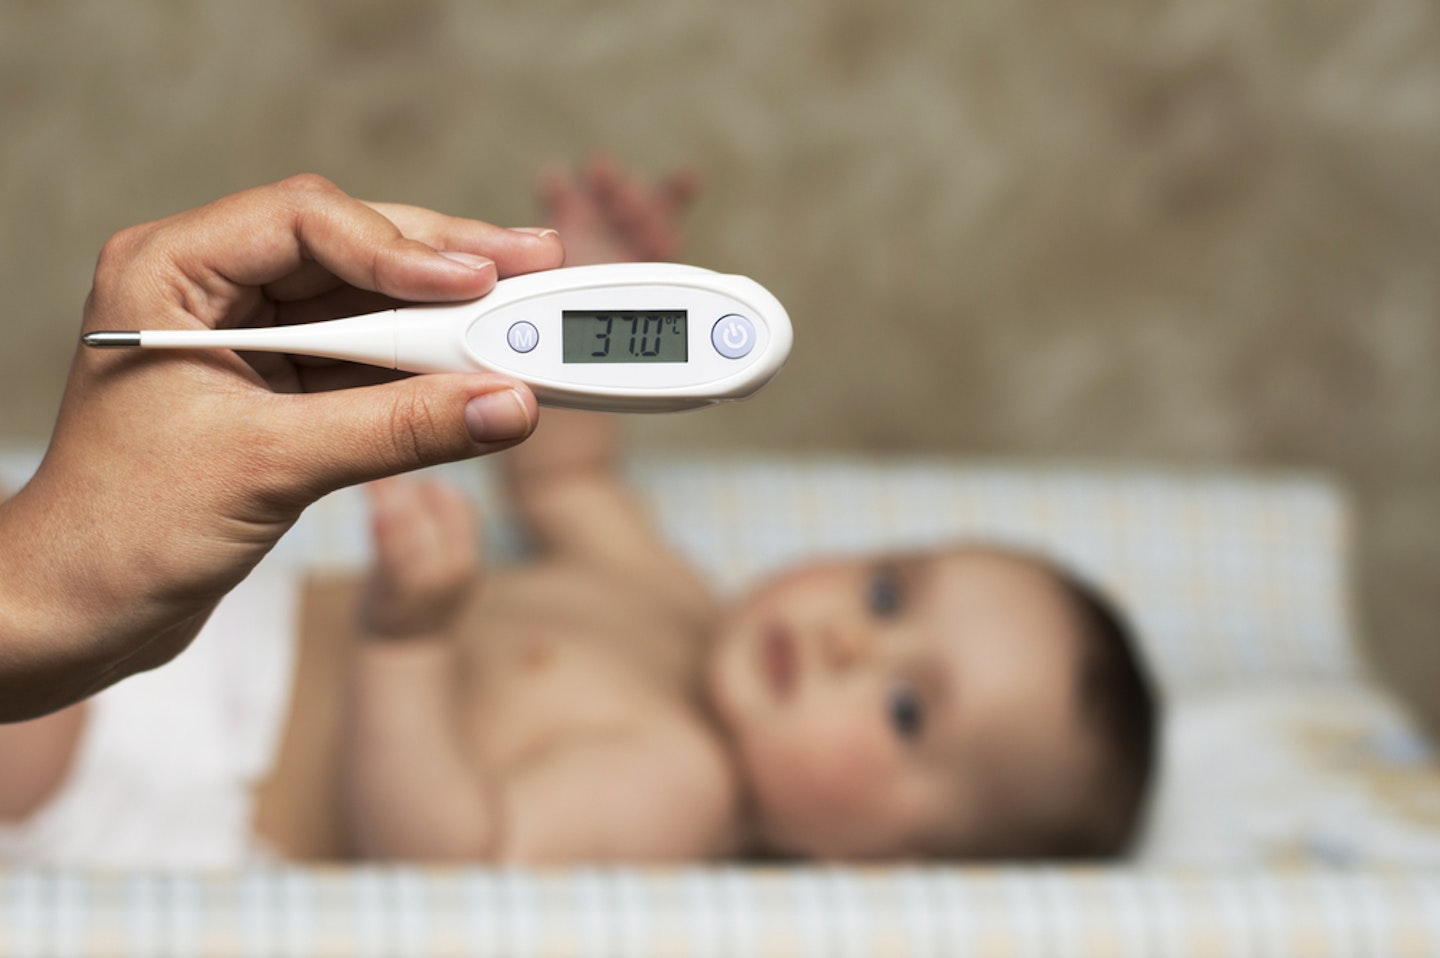 https://images.bauerhosting.com/affiliates/sites/12/motherandbaby/legacy/root/babythermometer.jpg?ar=16%3A9&fit=crop&crop=top&auto=format&w=1440&q=80